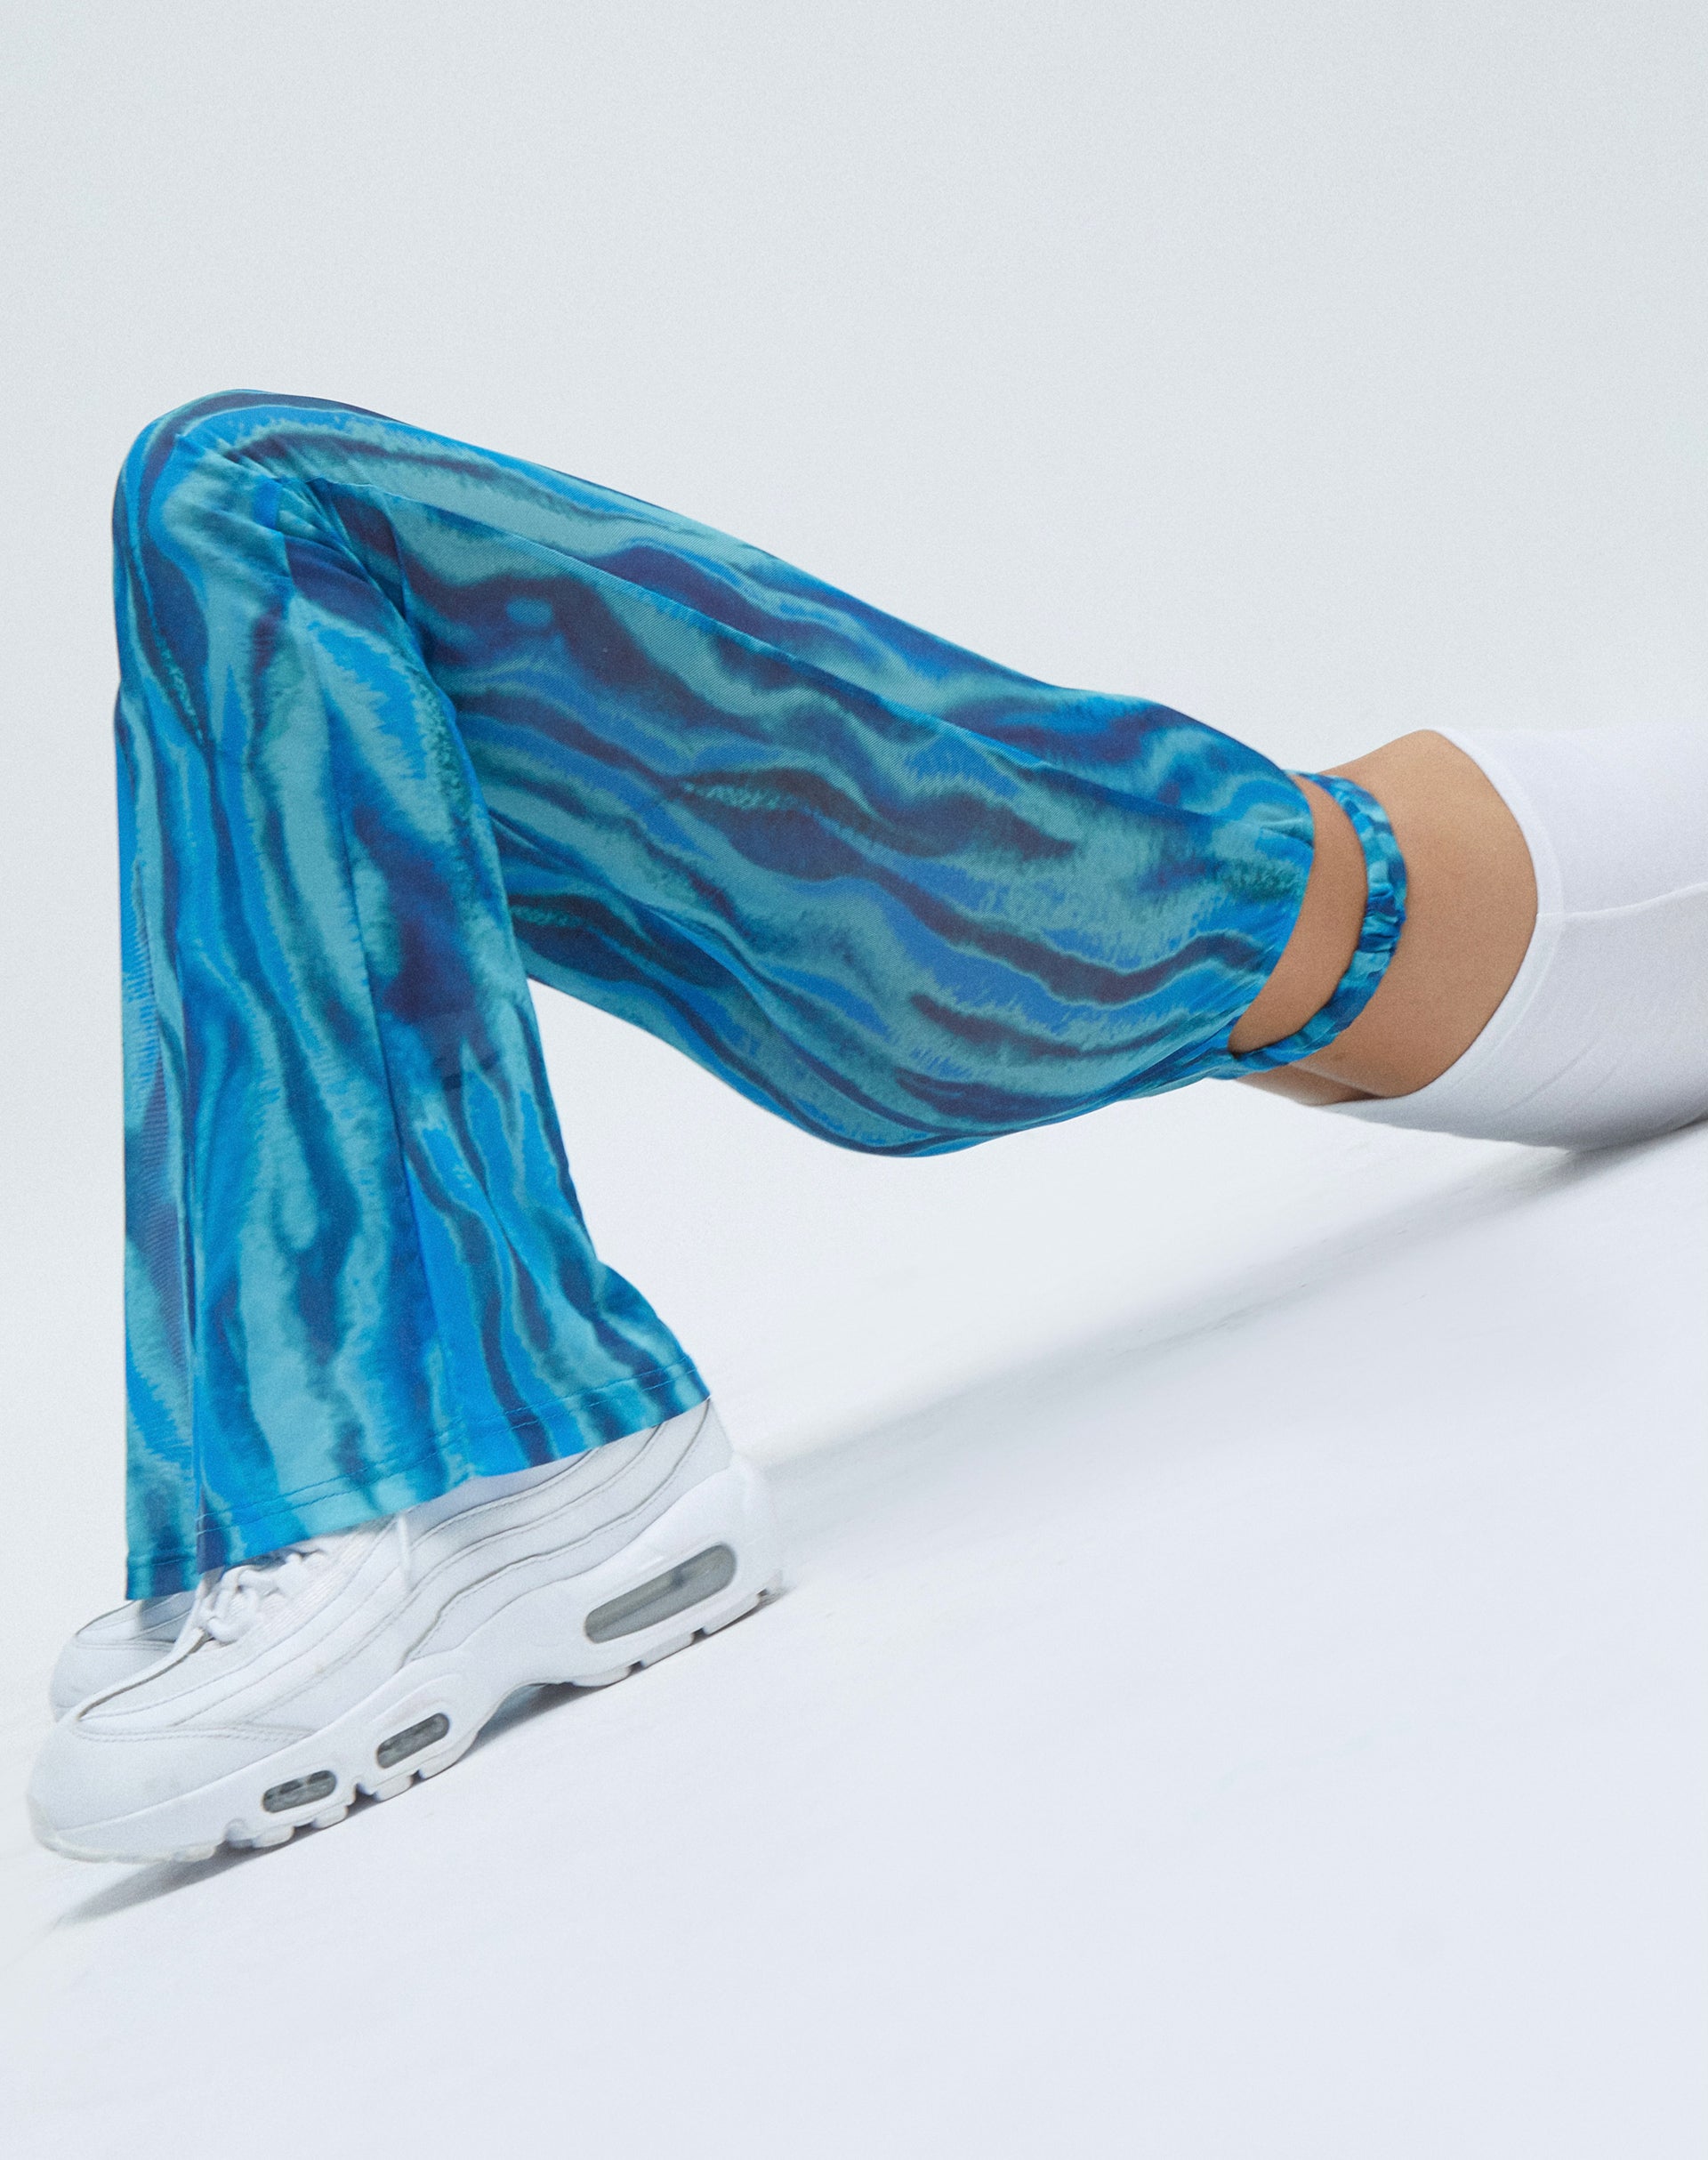 Image of Zola Flare Trouser in Tropical Rave